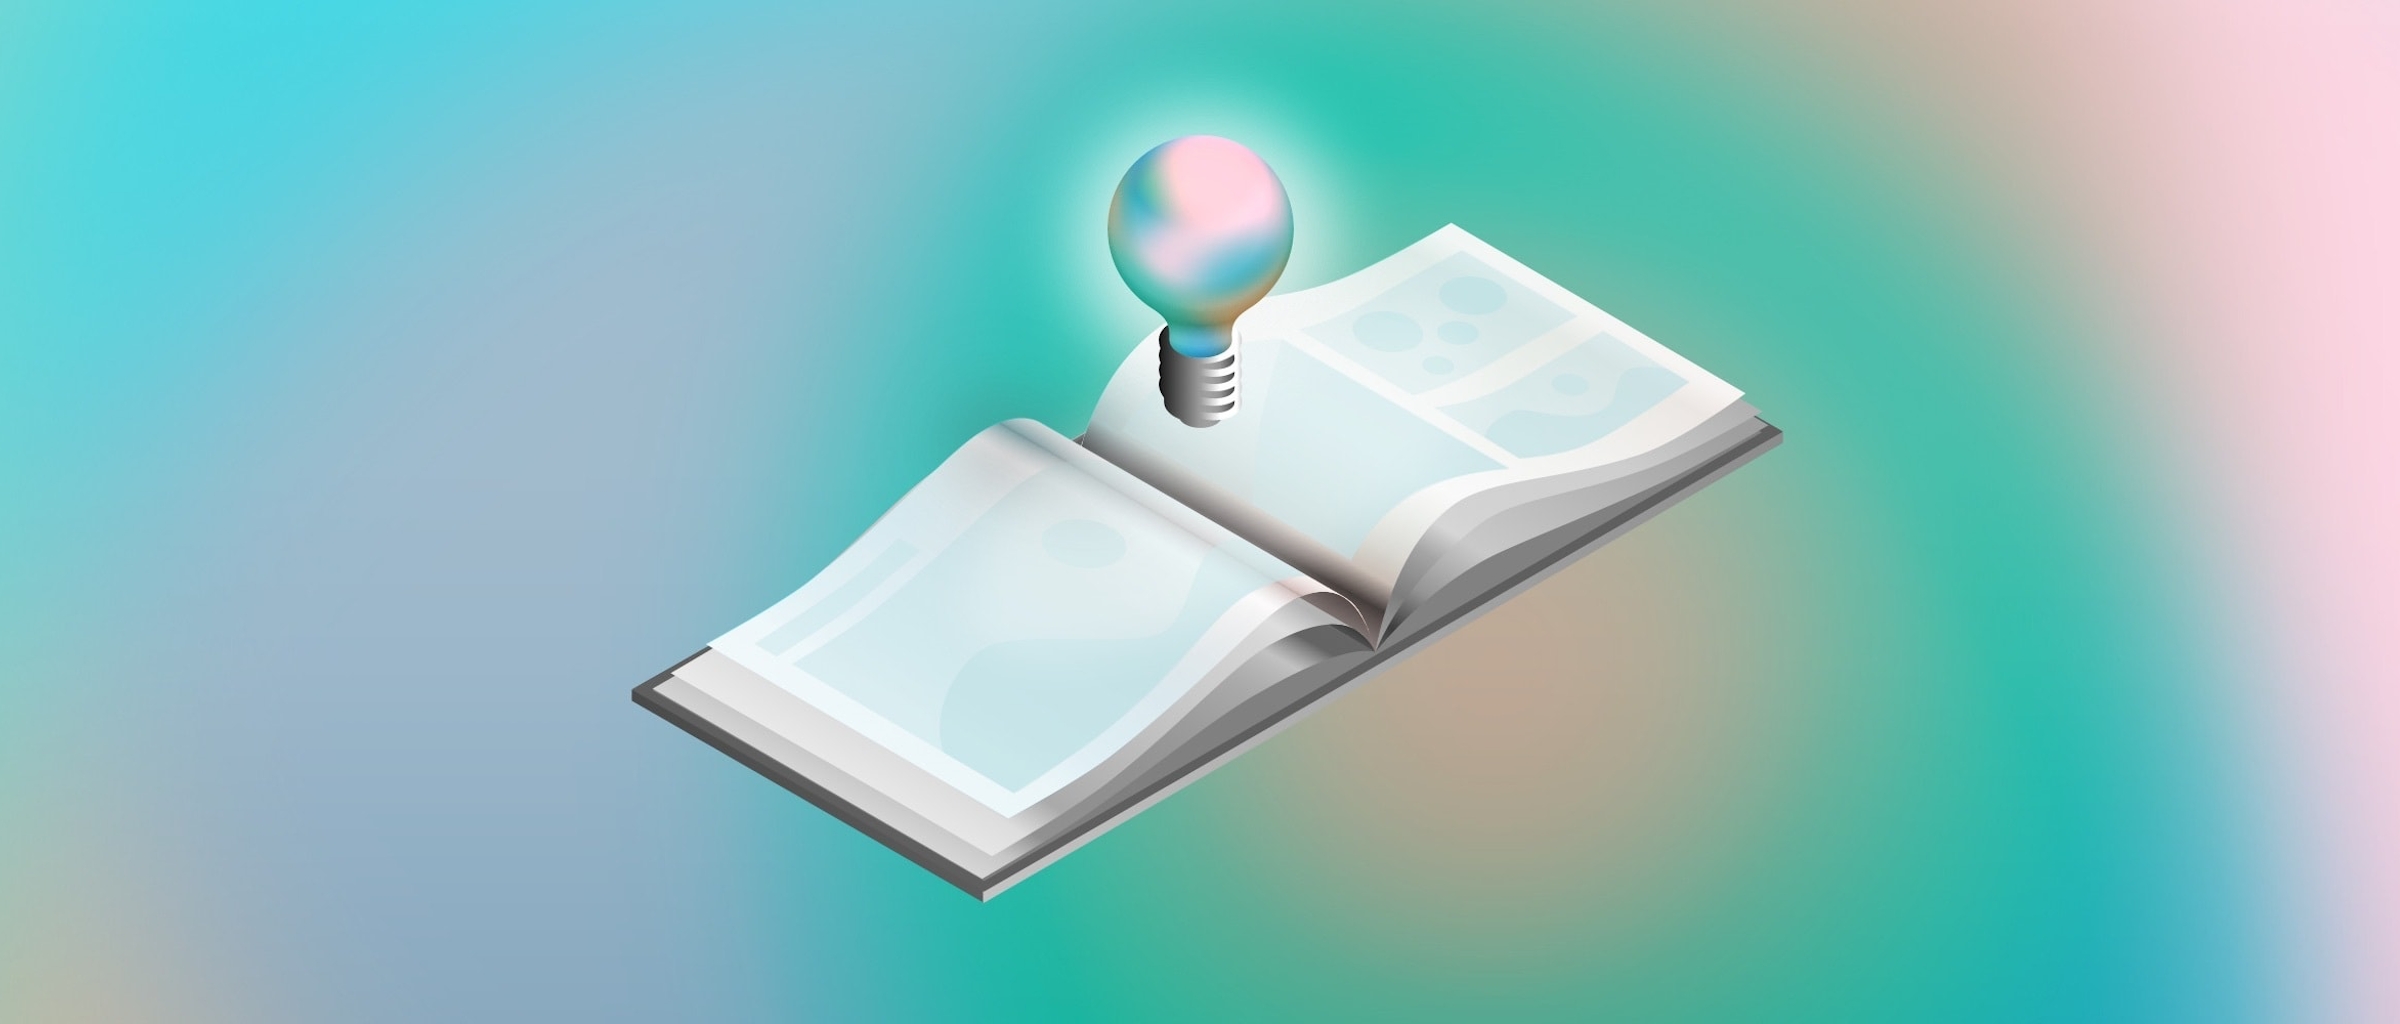 An illustrated image showing an open portfolio book with a lightbulb hovering above one page.